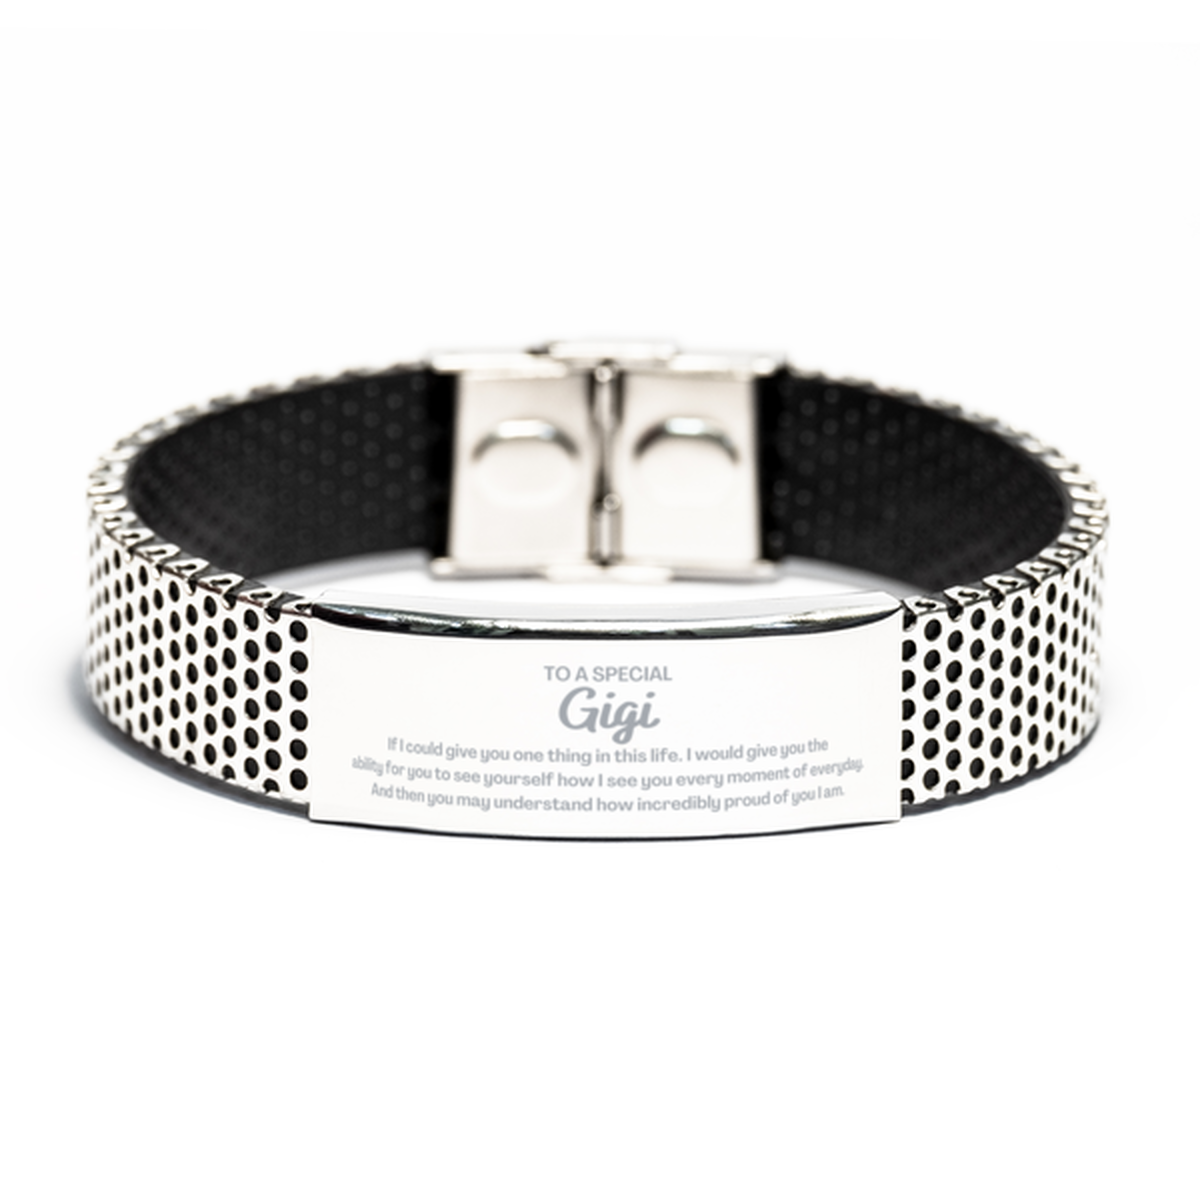 To My Gigi Stainless Steel Bracelet, Gifts For Gigi Engraved, Inspirational Gifts for Christmas Birthday, Epic Gifts for Gigi To A Special Gigi how incredibly proud of you I am